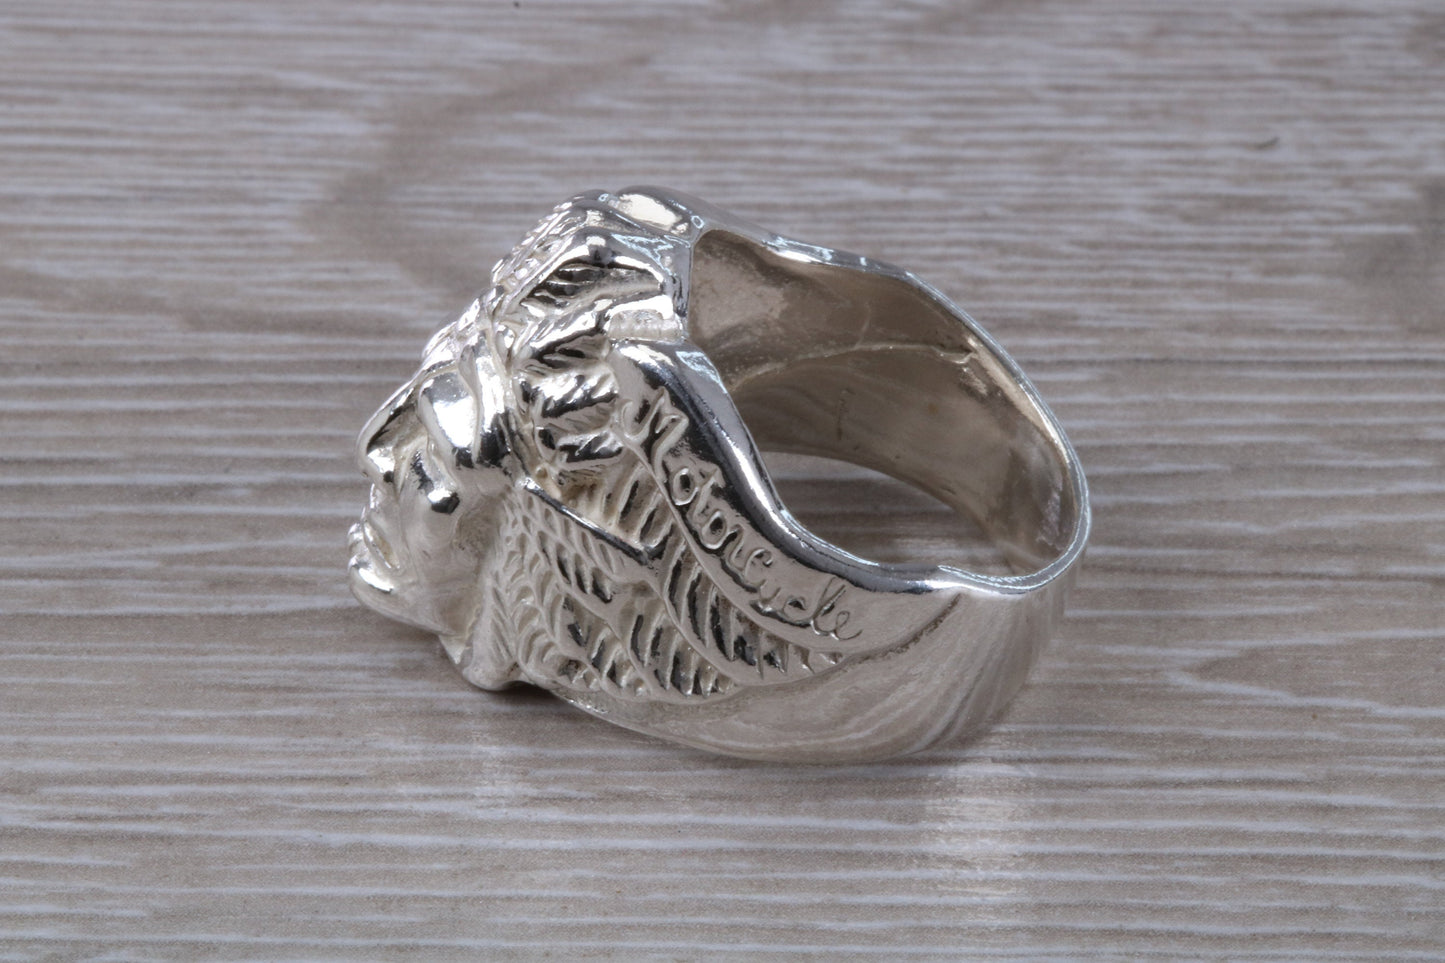 Large and heavy American Indian head ring,solid silver,unisex for ladies and gents,available in silver, yellow gold, white gold and platinum